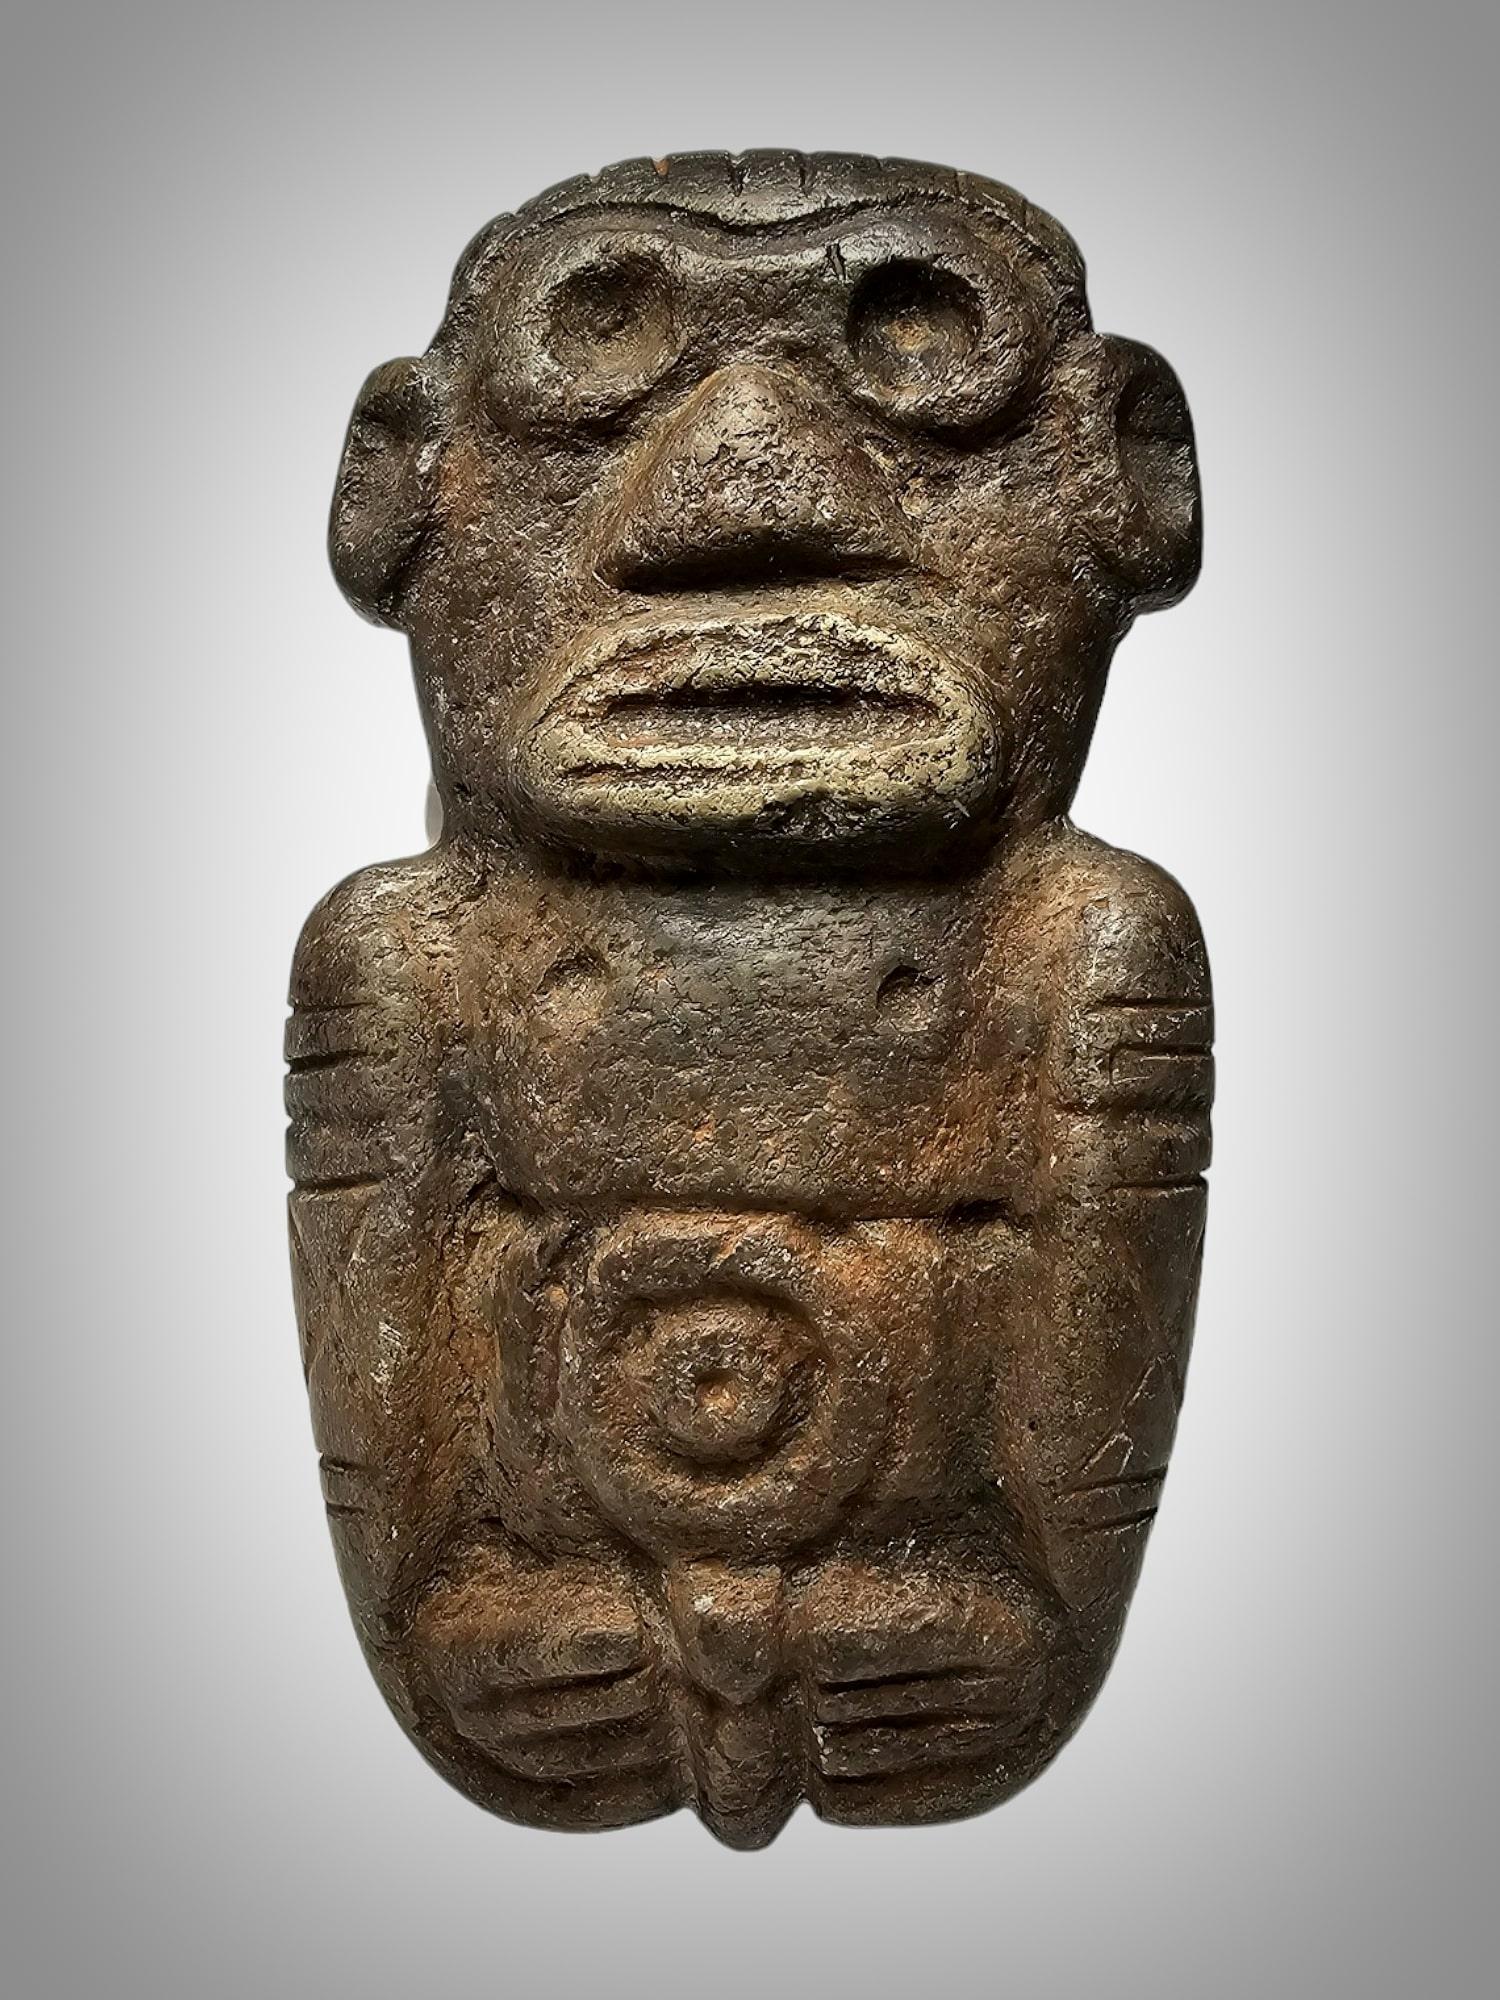 Pre-Columbian, Caribbean area, perhaps Dominican Republic, Taino (Arawak) Indians, ca. 1000 to 1500 CE. An incredibly well-preserved stone zemi of a Taino  deity  shown in a crouching position with huge eyes . Size: 12X7X2 CM

According to the